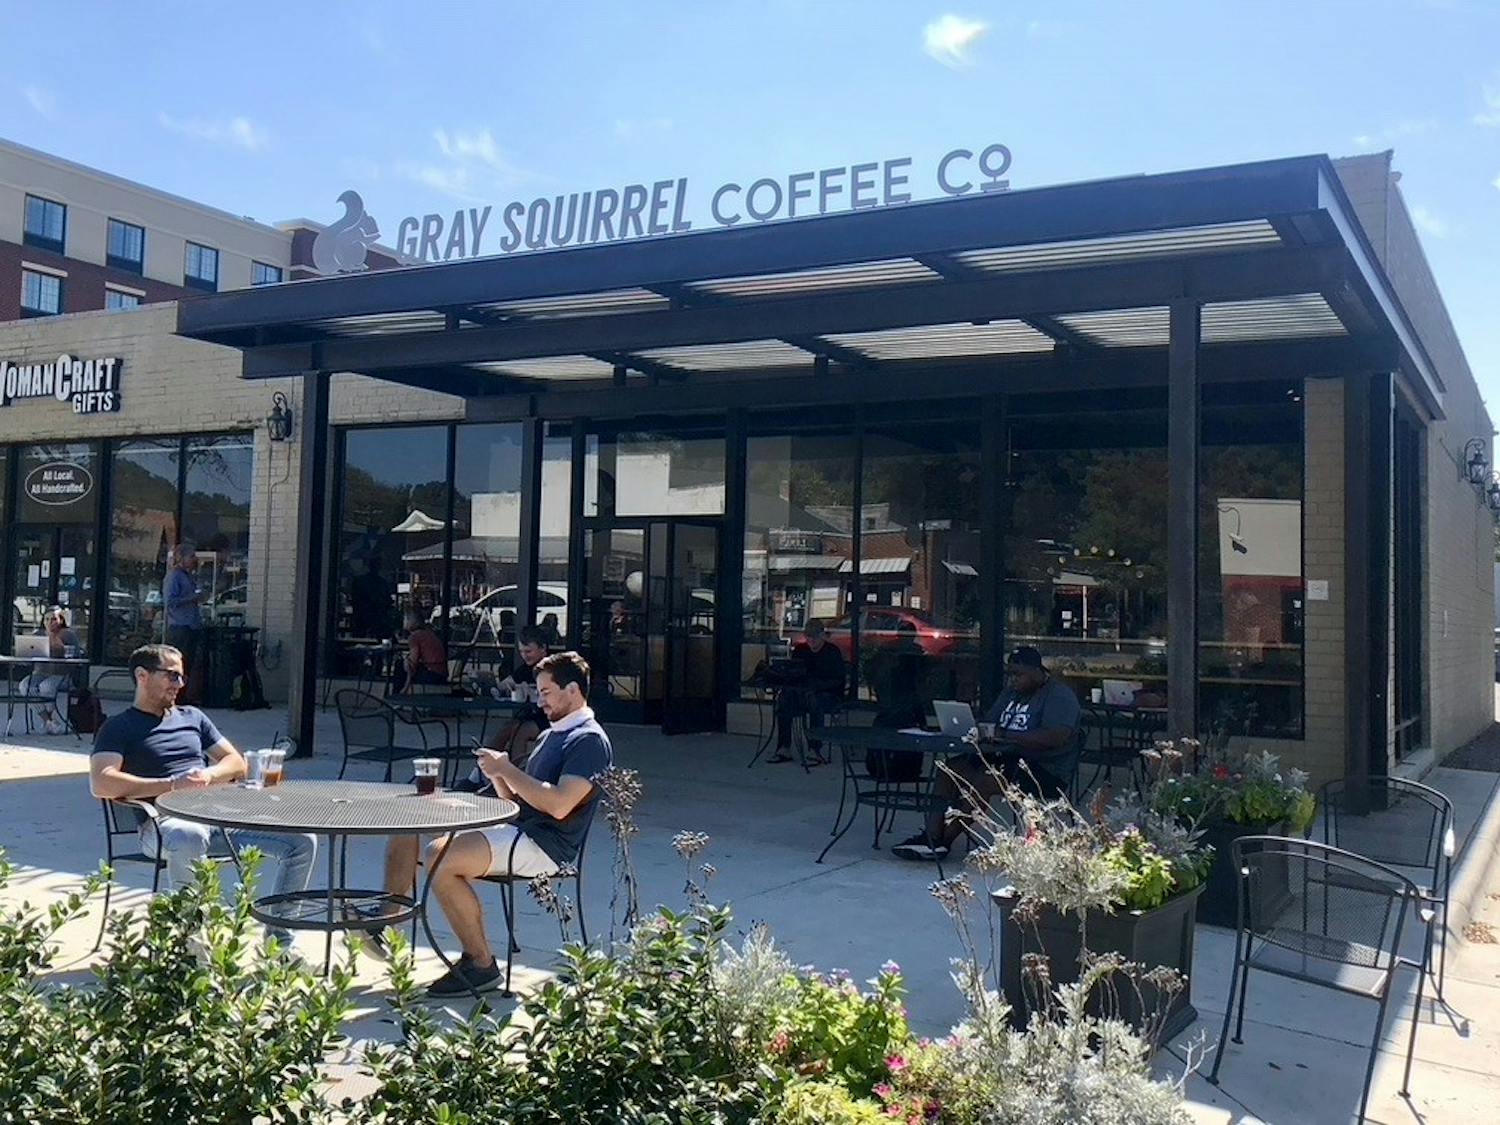 The Gray Squirrel Cafe, photographed on Thursday, Oct. 8, 2020, is the location for Carrboro's new mural that will be painted by Jermaine "JP" Powell.